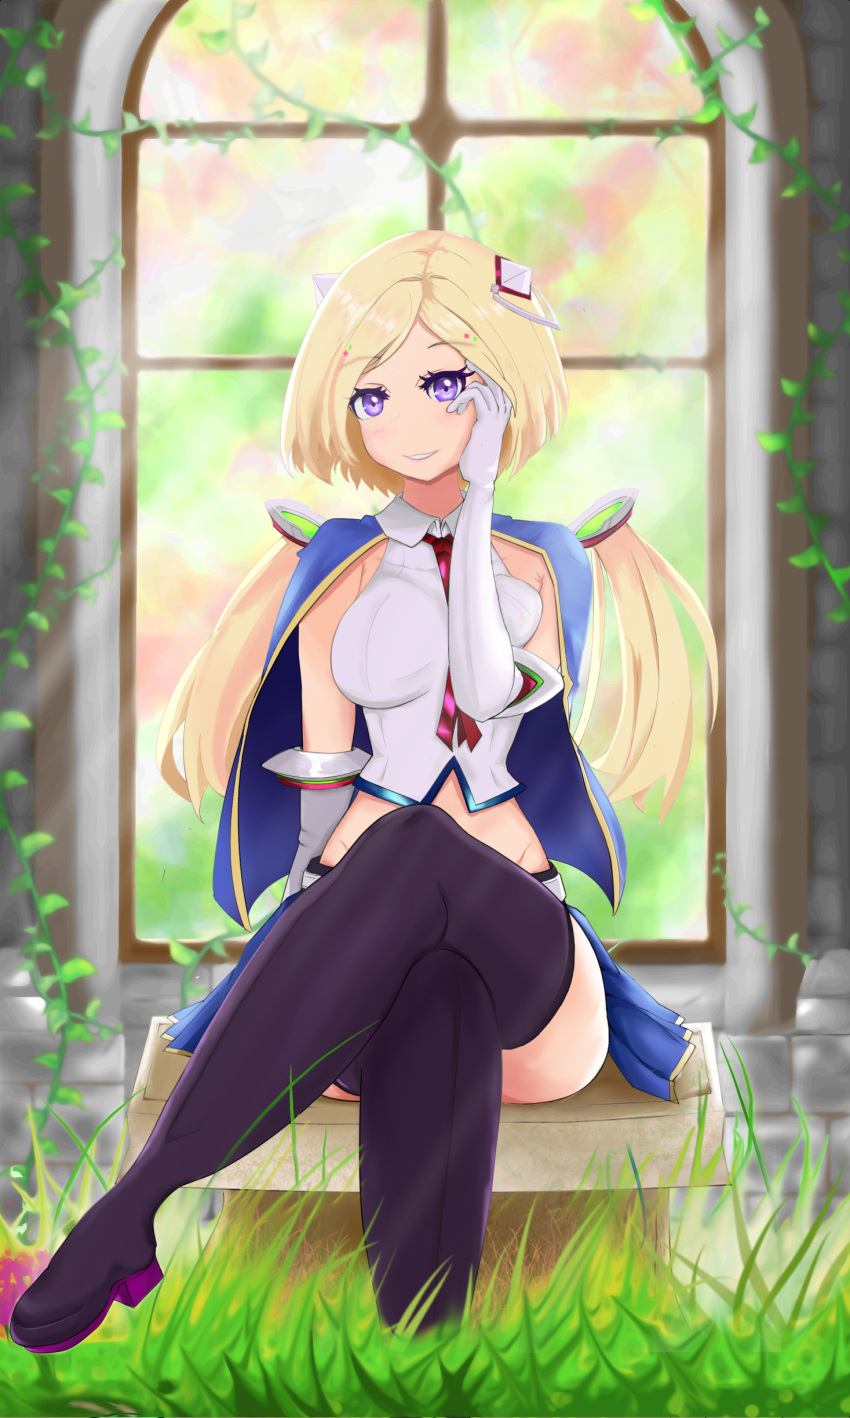 absurdres aki_rosenthal blonde_hair boots cape fantasy gloves grass hair_extensions highres hololive plant sunlight tall_grass thigh-highs thigh_boots thighs trolllogicworks twintails vines violet_eyes window